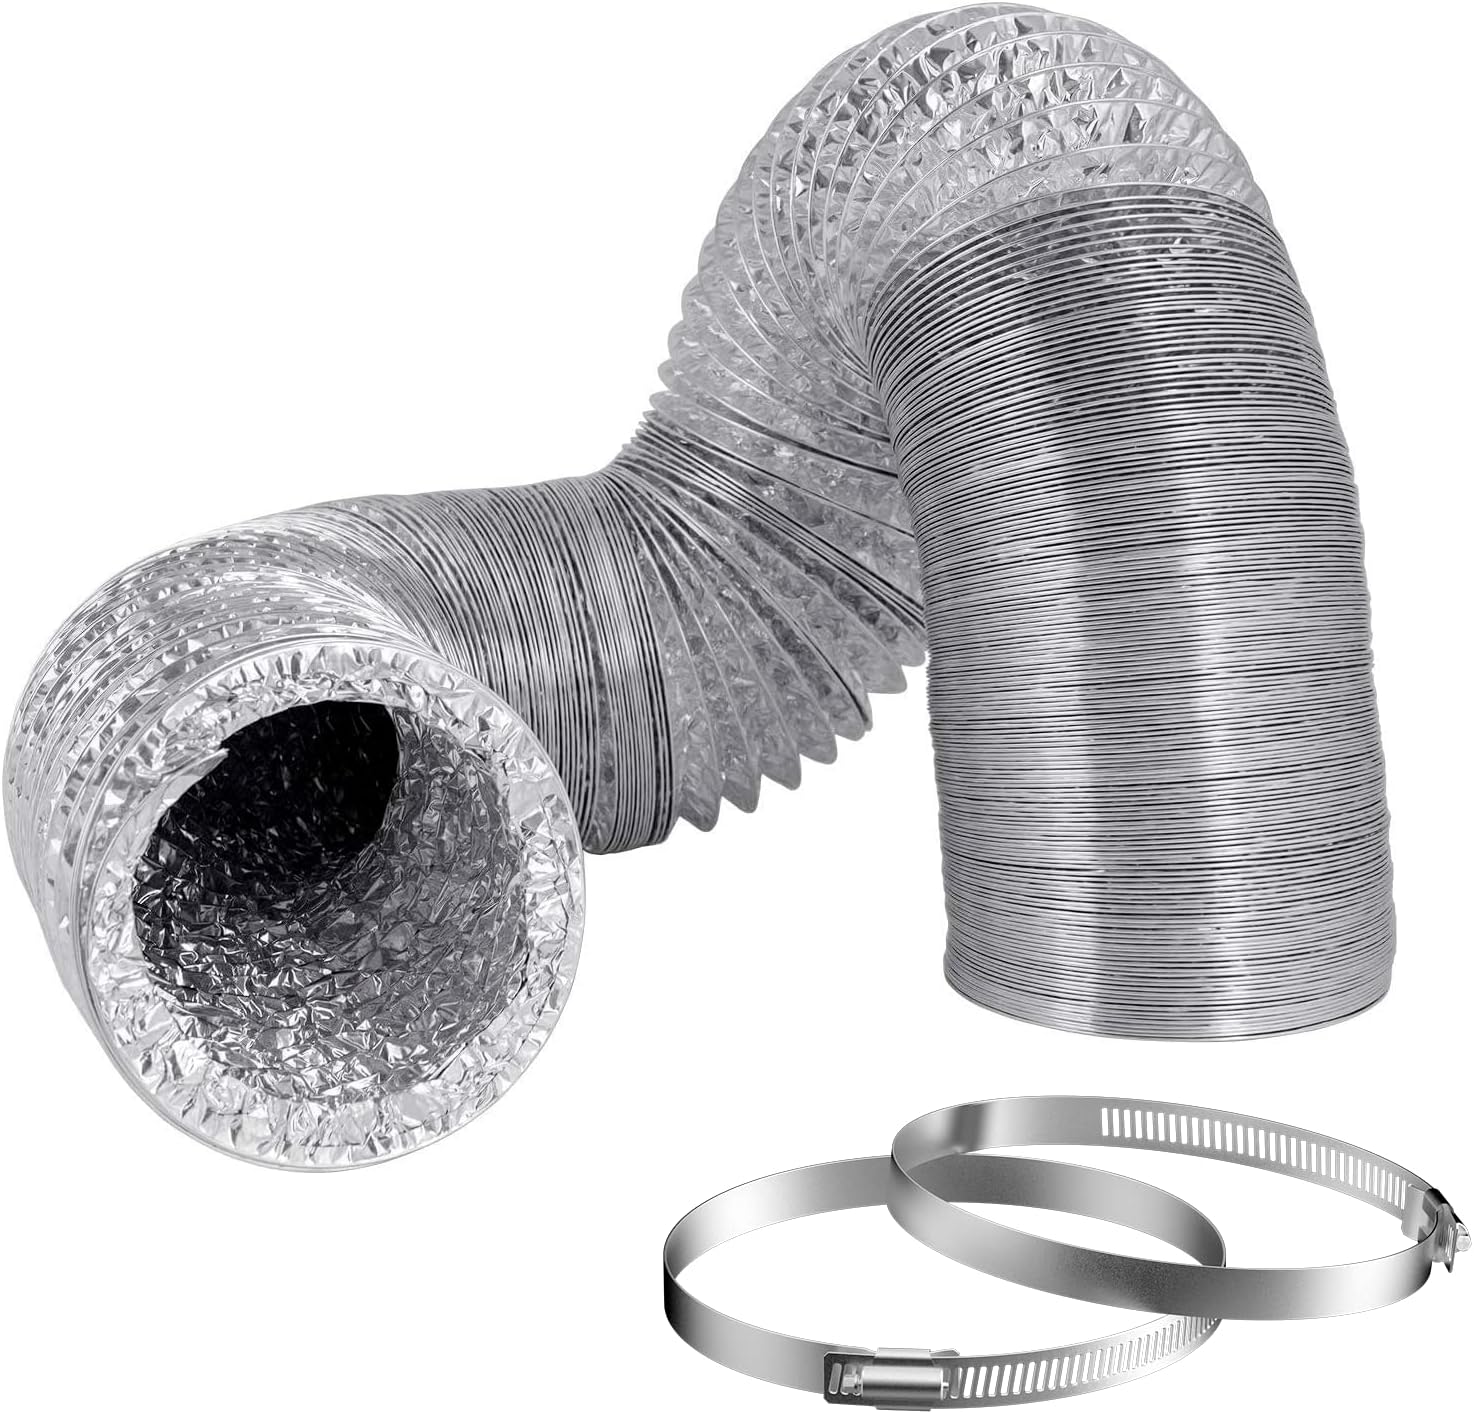 Hon&Guan 4 Inch Duct 6.56 Feet,  Flexible Dryer Vent Hose for Tight Space Dryer Exhaust Hose Aluminum Duct for Heating and Cooling Venti